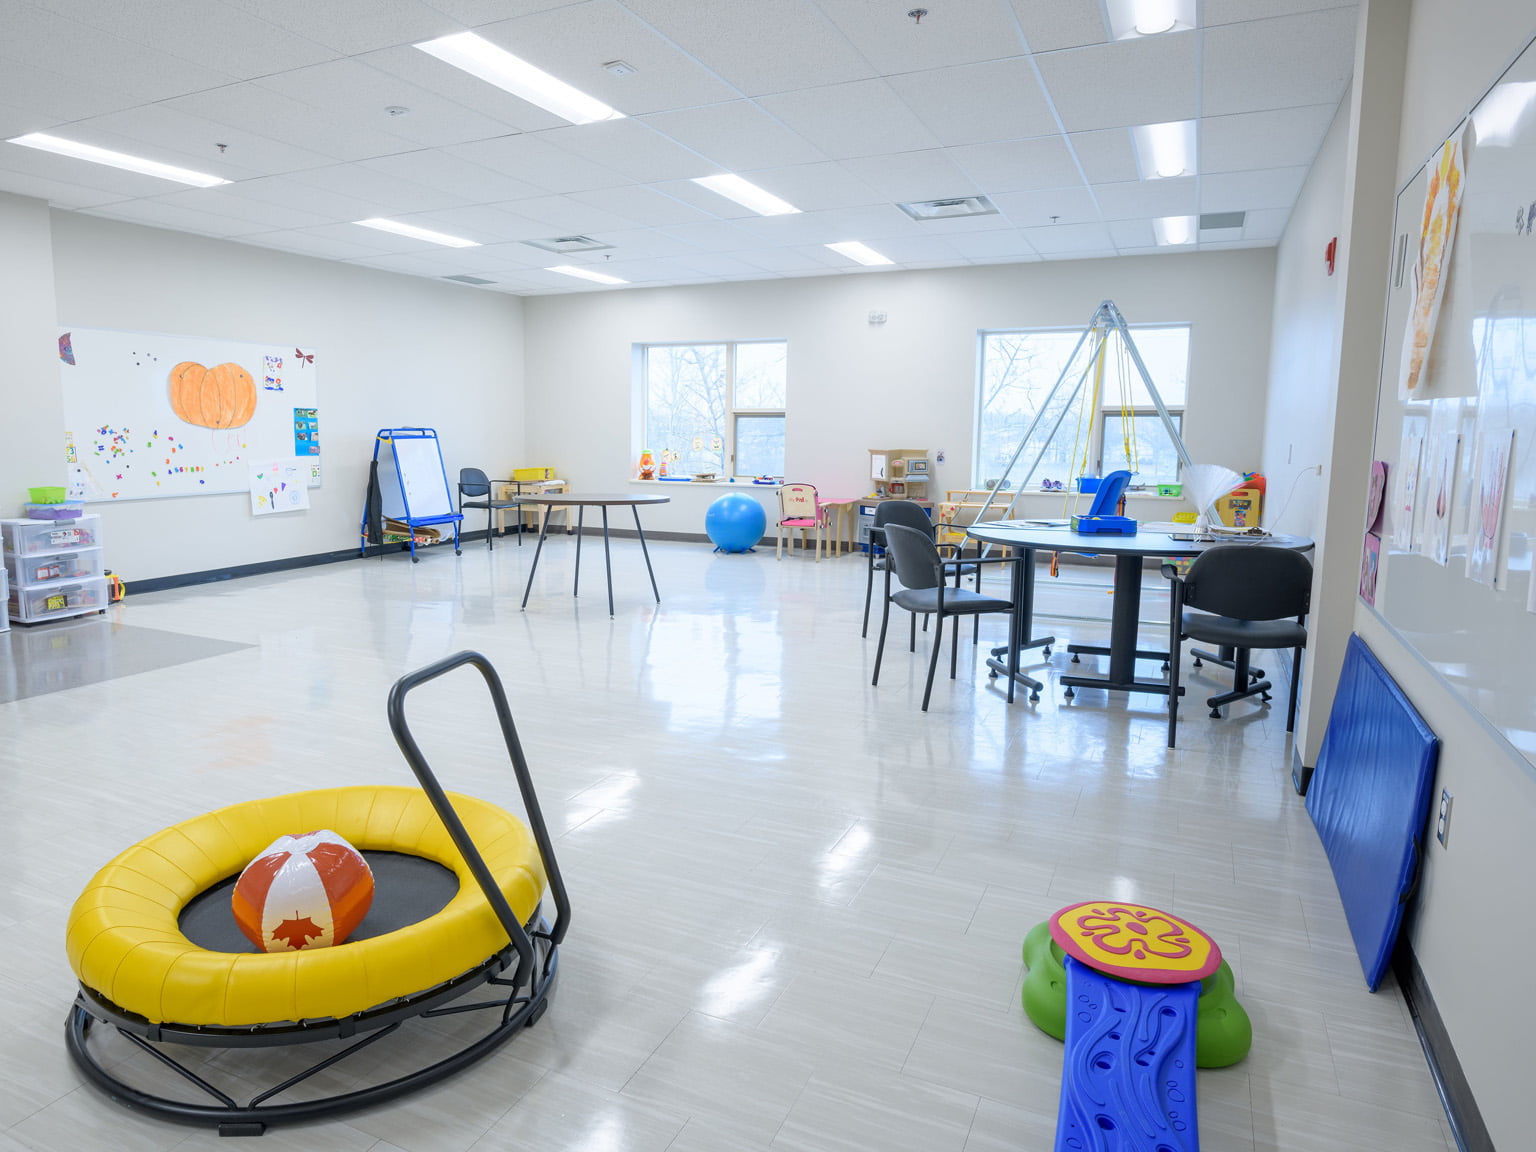 École Publique Passeport Jeunesse School can accommodate up to 1,030 students and staff